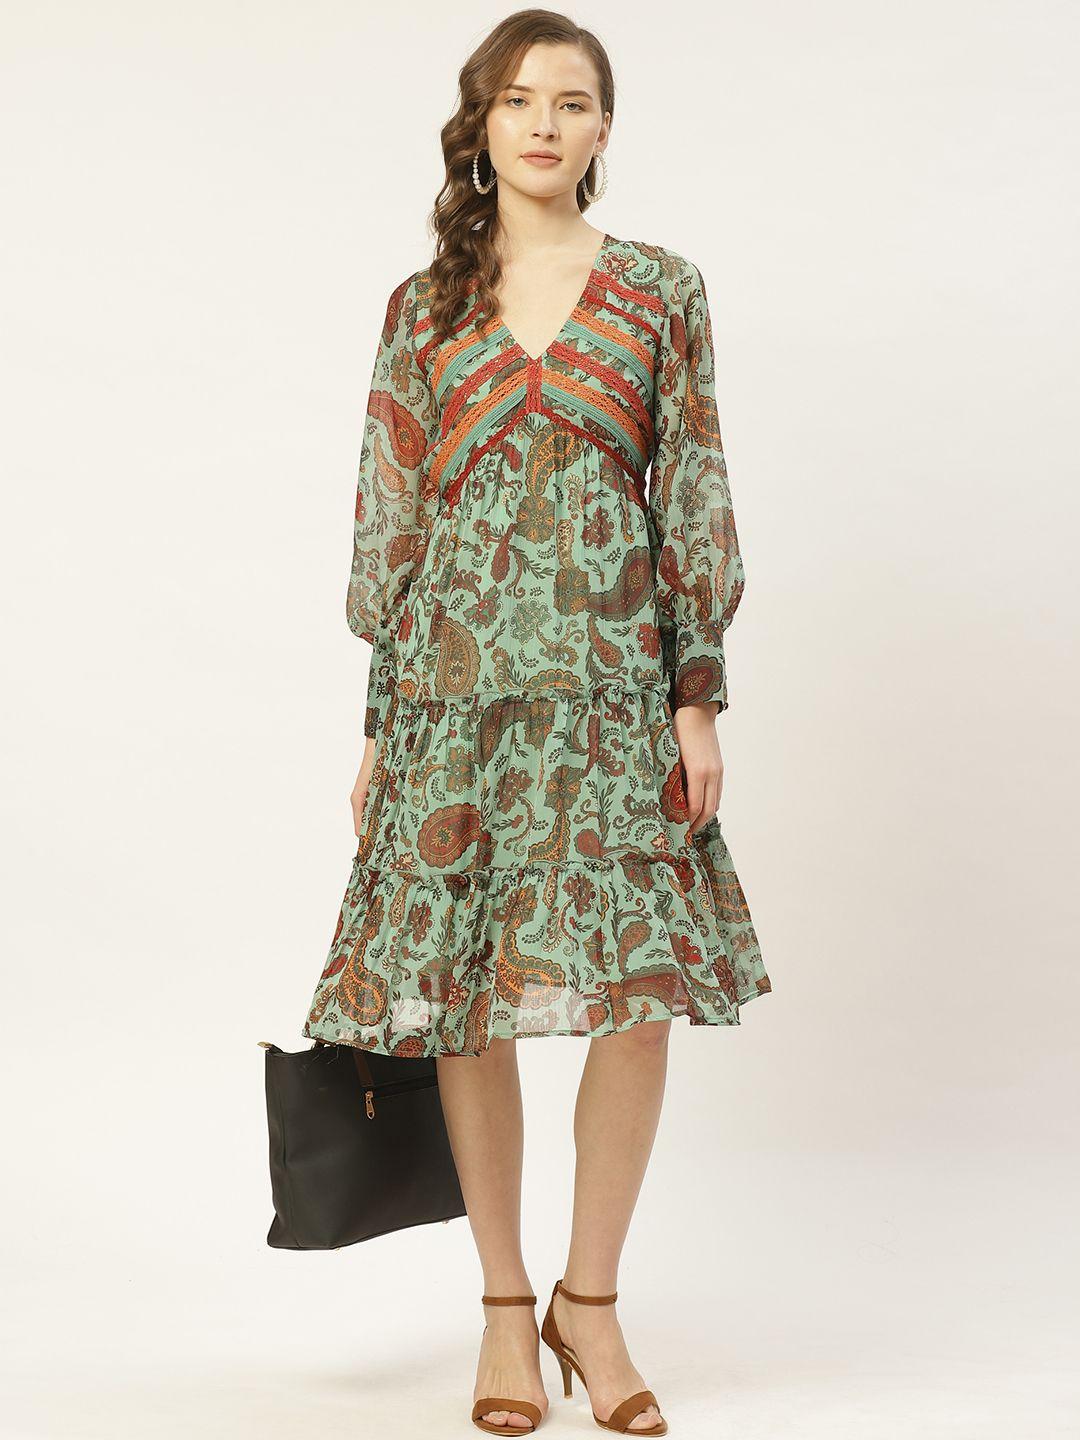 antheaa women mint green & orange paisley print tiered a-line dress with lace inserts